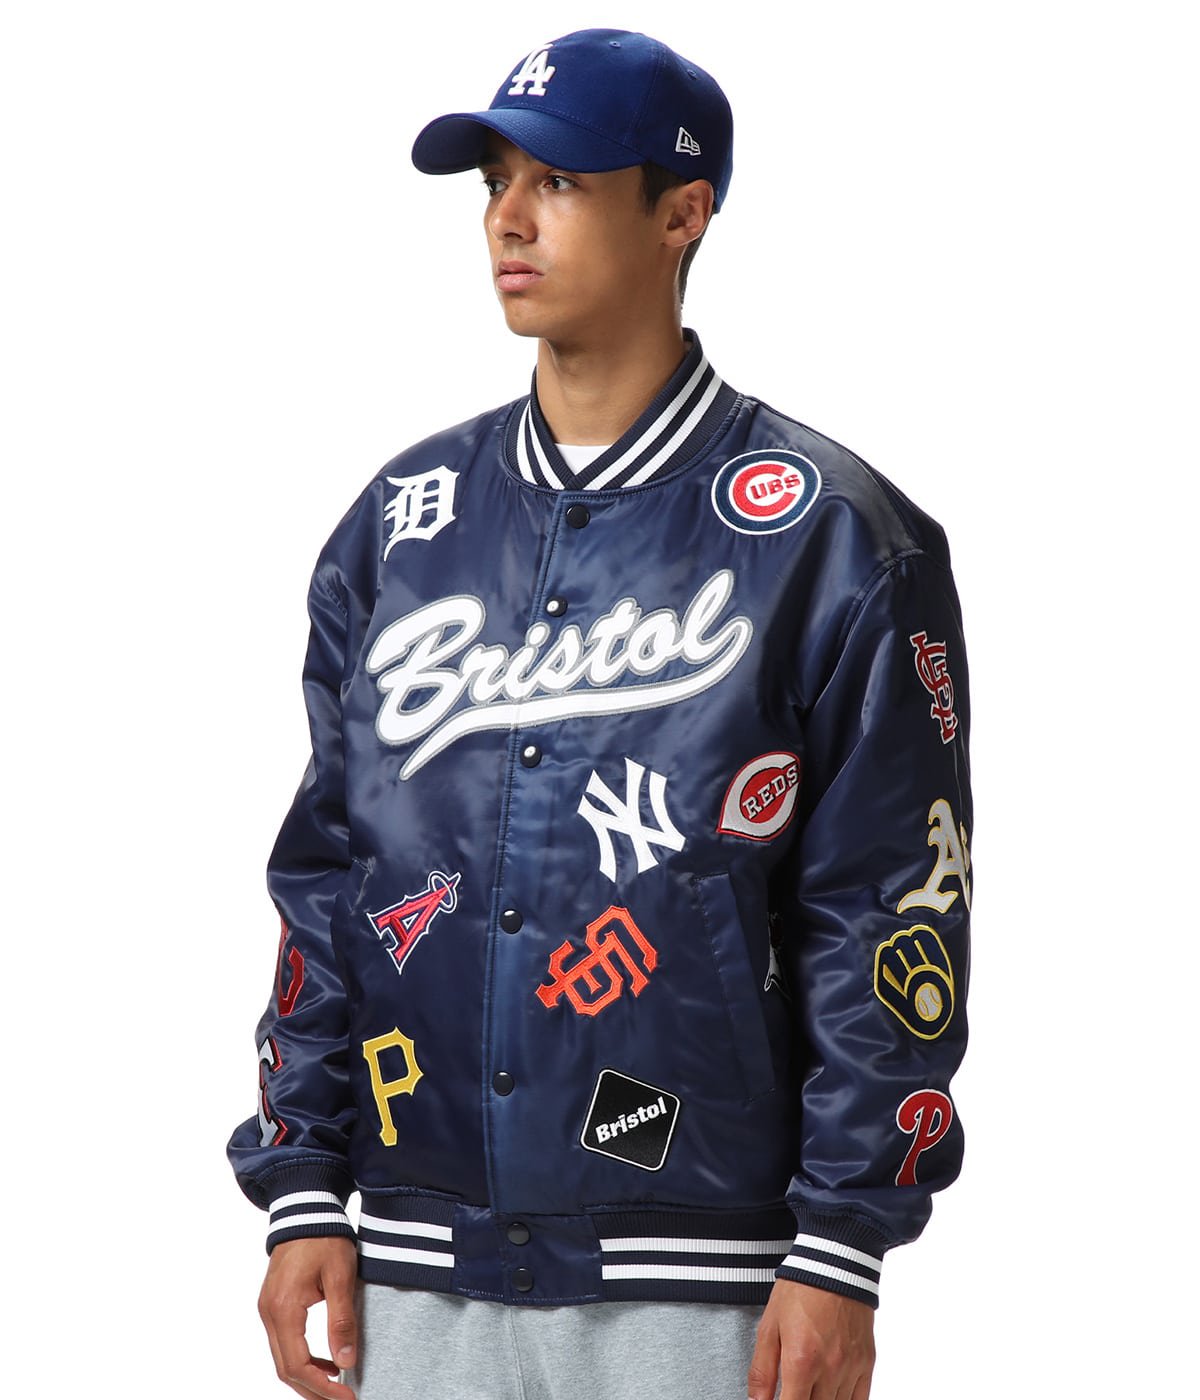 FCRB ALL TEAM REVERSIBLE VARSITY JACKET | www.myglobaltax.com